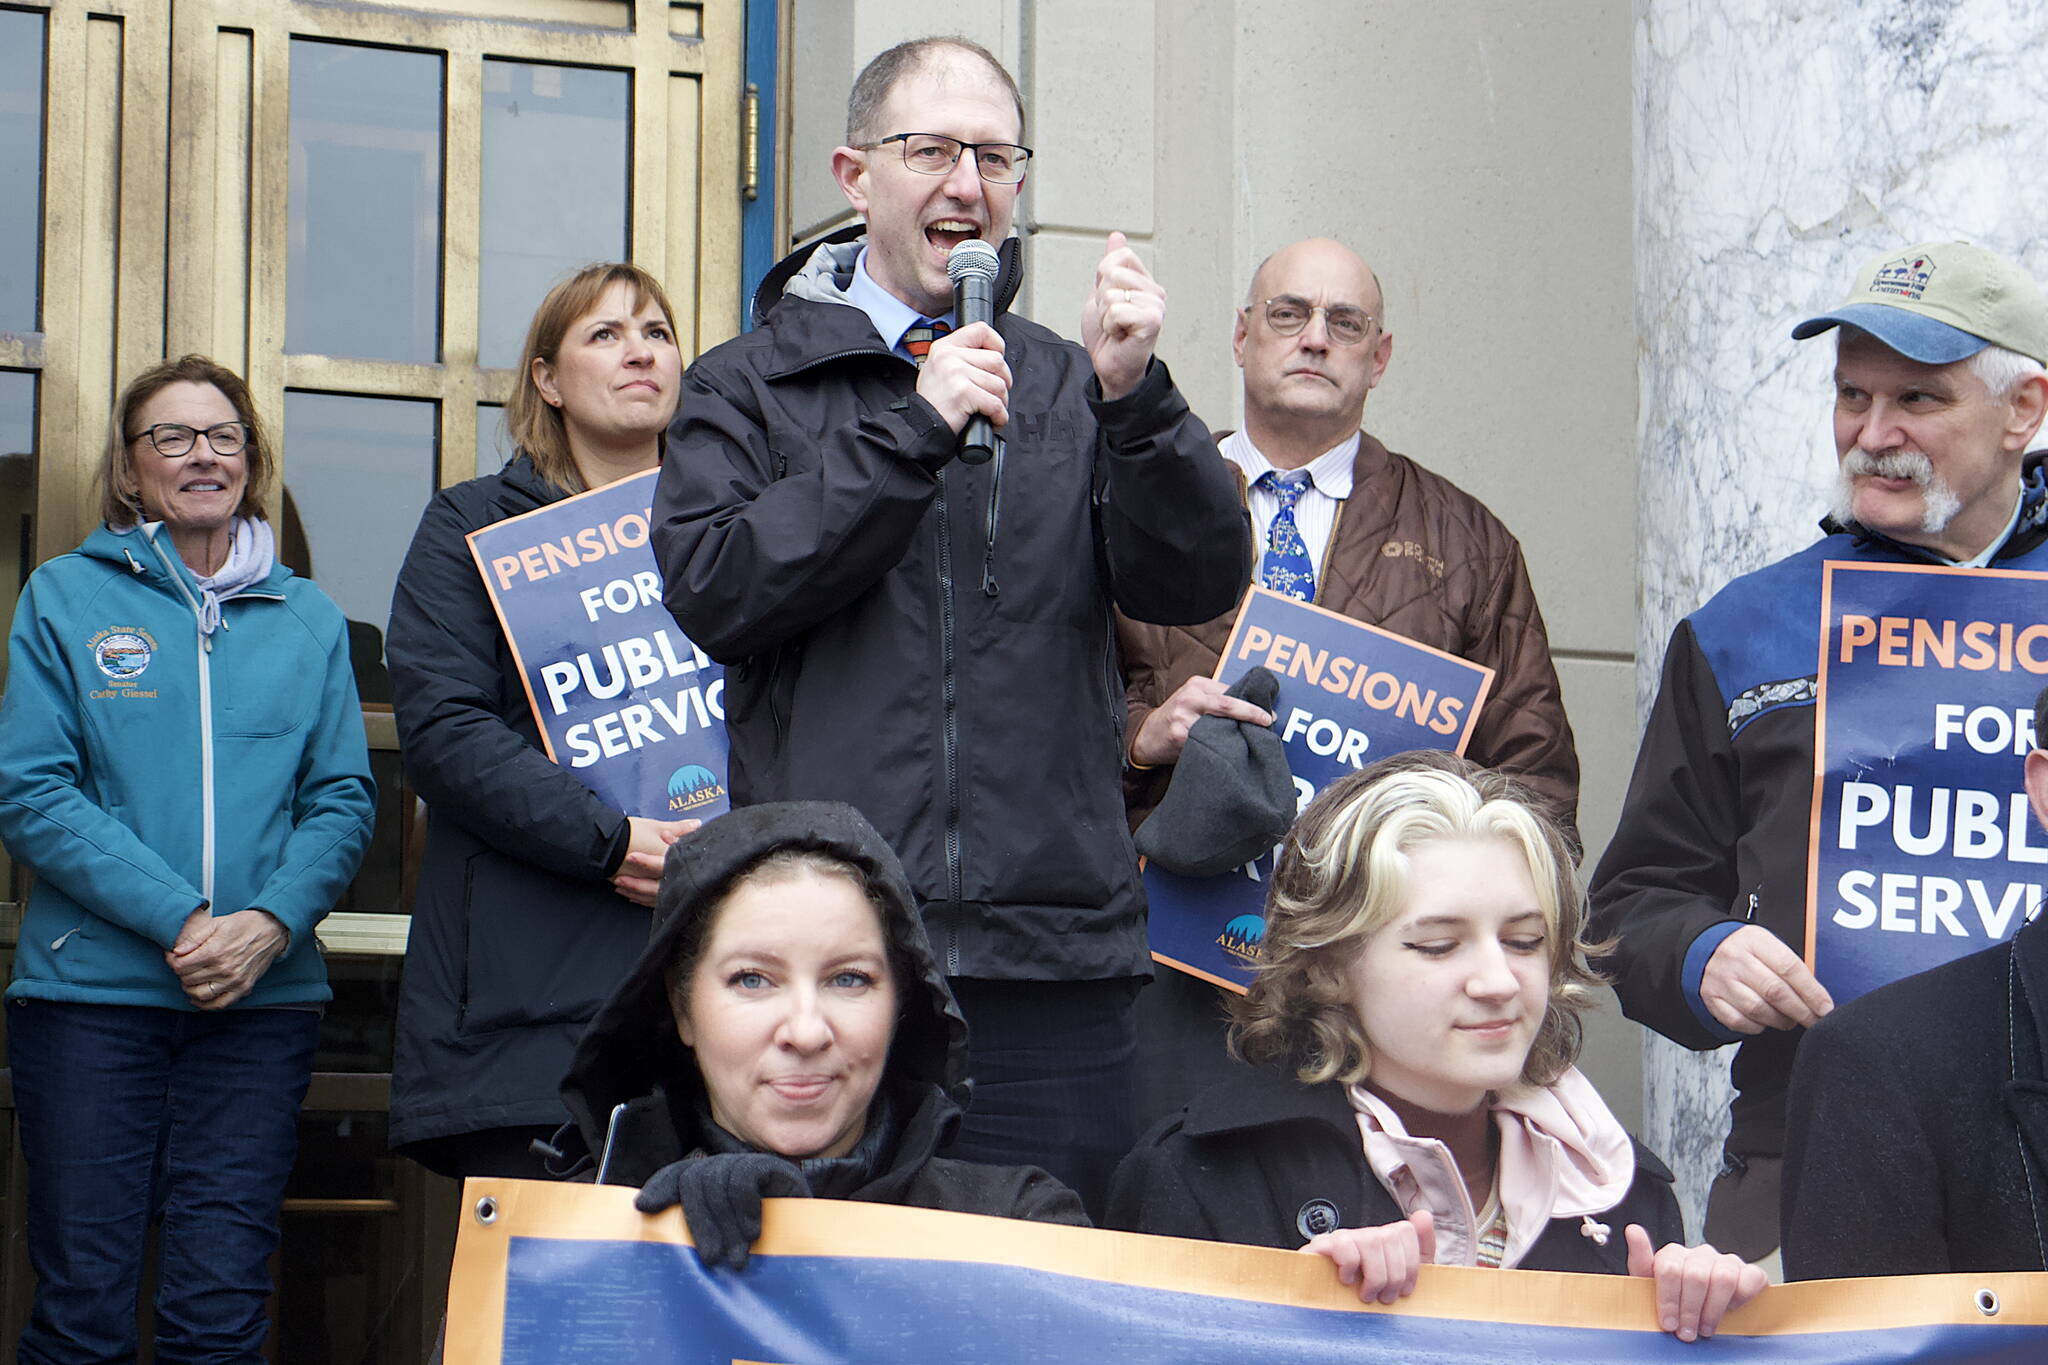 State Sen. Jesse Kiehl, D-Juneau, vows a bill boosting state employees pensions will pass “the 33rd Alaska Legislature” during a rally by about 70 union supporters on the steps of the Alaska State Capitol on May 2, 2023. A bill restoring pensions advanced out of the Senate Finance Committee on Wednesday and is likely to get a floor vote during the next couple of weeks, according to Kiehl. (Mark Sabbatini / Juneau Empire file photo)